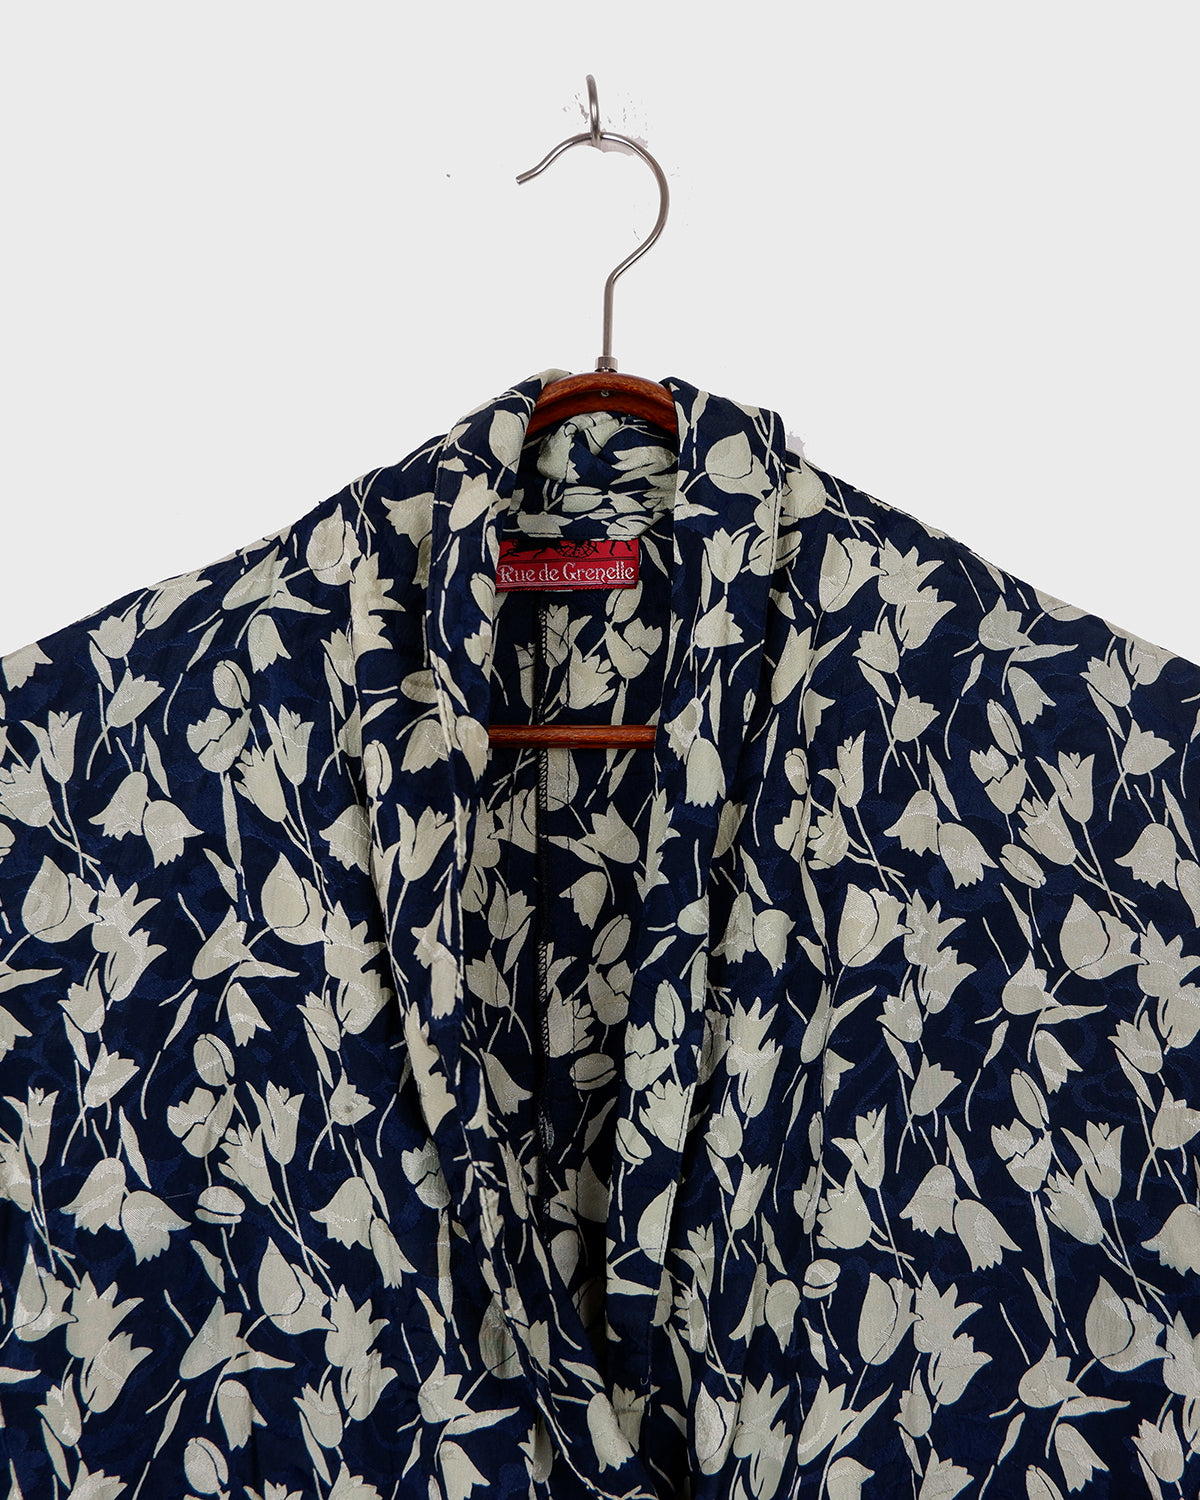 Get ready to channel some serious 90s romance with this vintage navy blue floral blouse with its light shimmering optic. Crafted from a luxurious silk mix blend, it features golden buttons and a unique collar for some extra flair. Romance never goes out of style!